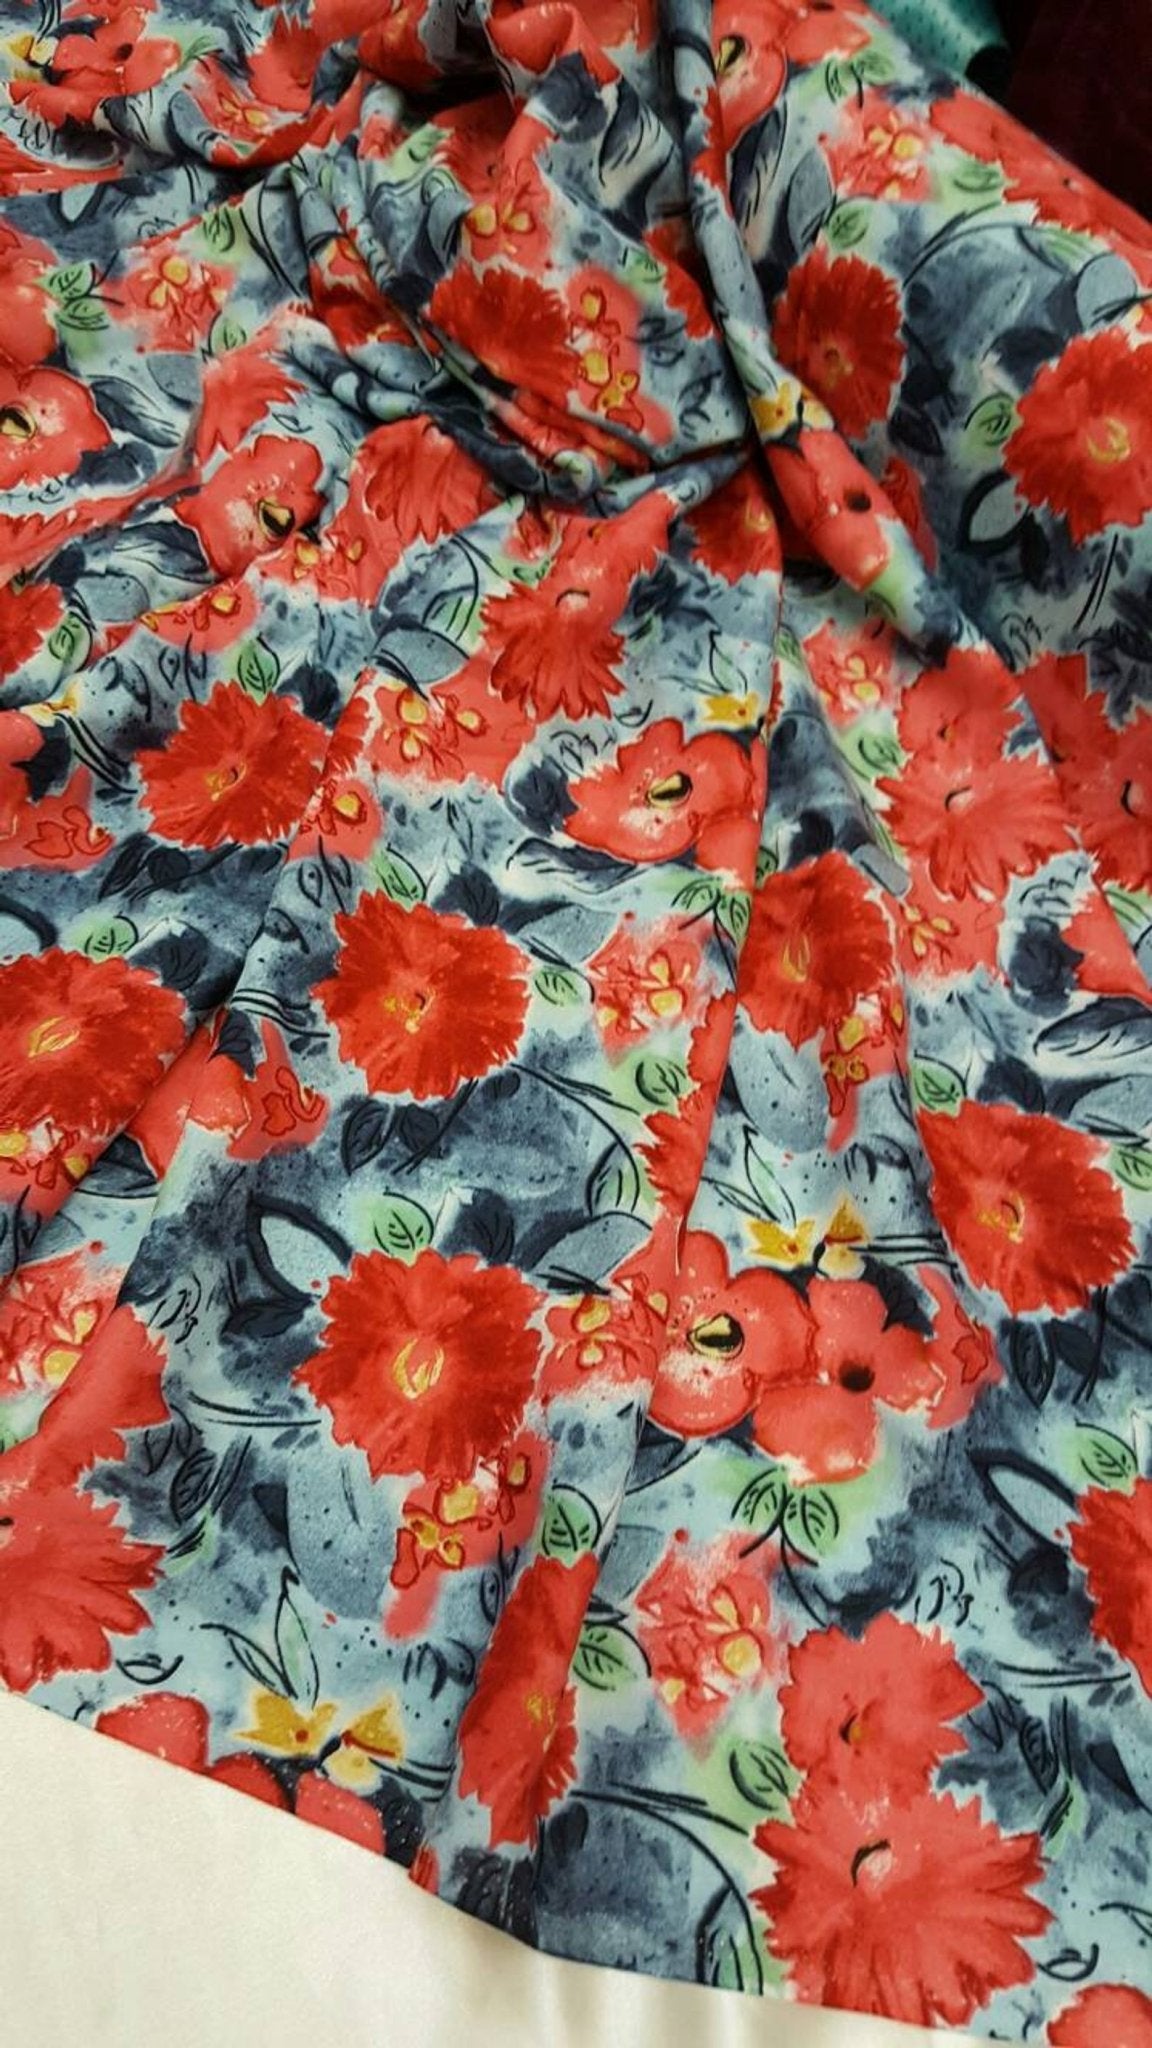 Rayon challis coral flowers on blue background soft flowy organic kids dress draping decoration fabric sold by the yardICEFABRICICE FABRICS1Rayon challis coral flowers on blue background soft flowy organic kids dress draping decoration fabric sold by the yard ICEFABRIC